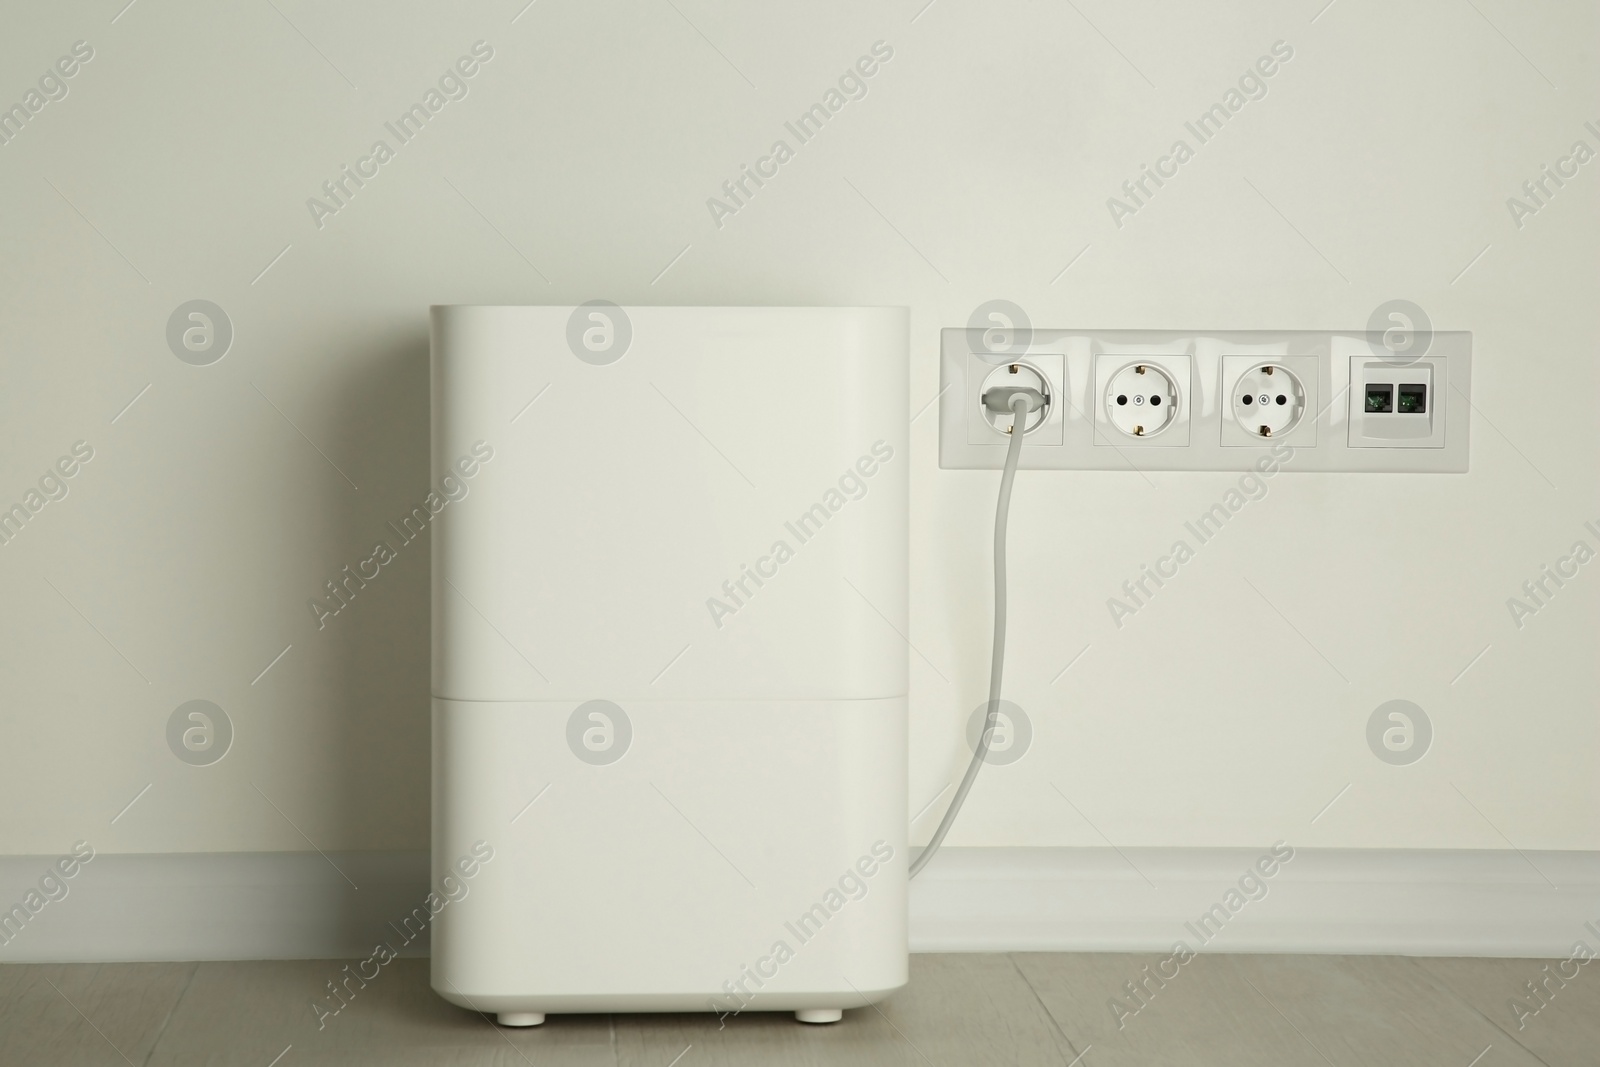 Photo of Modern air humidifier plugged into power socket on floor indoors